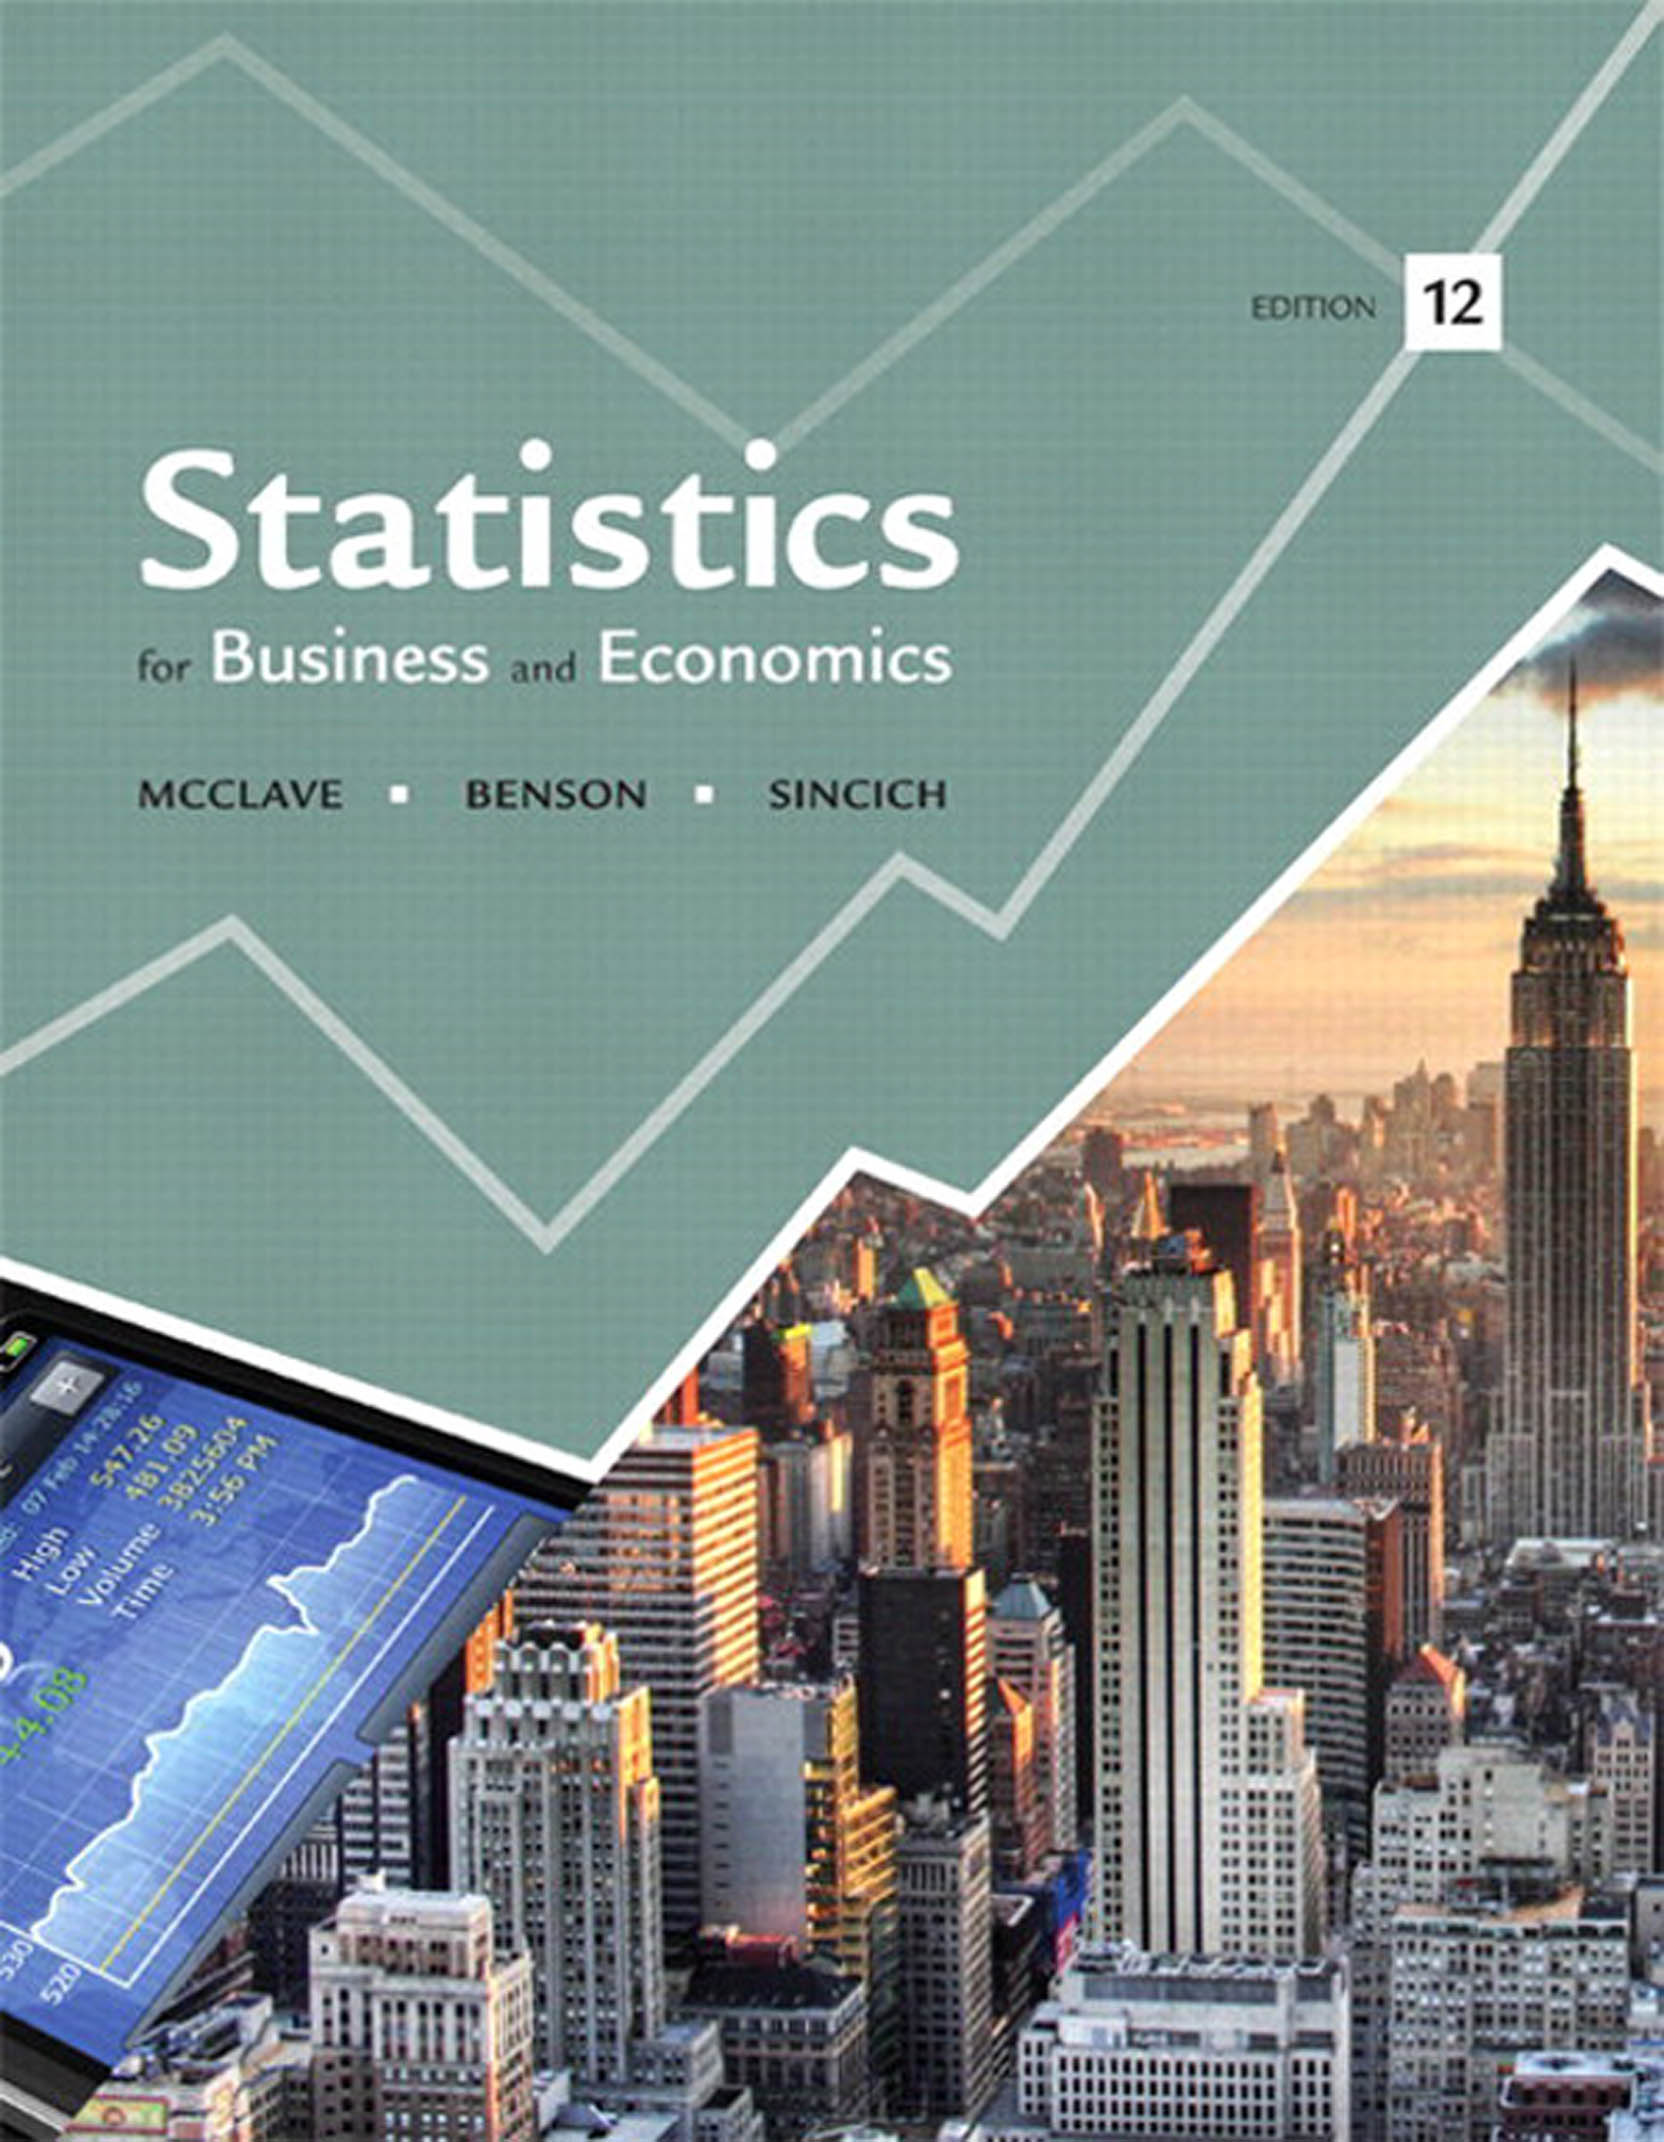 Statistics for Business and Economics 12e by McClave 教材+答案+光盘Minitab数据